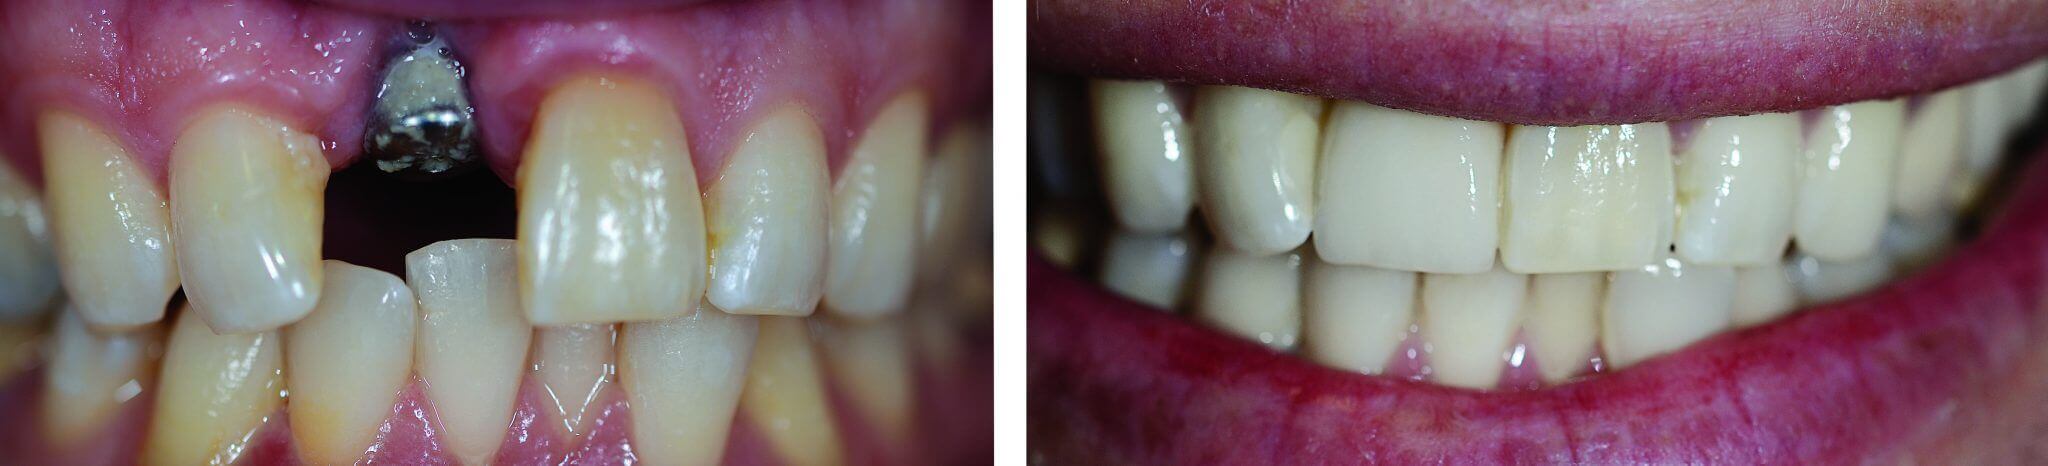 CERC Crown on Dental Implant with Professional Teeth Cleaning and Whitening.